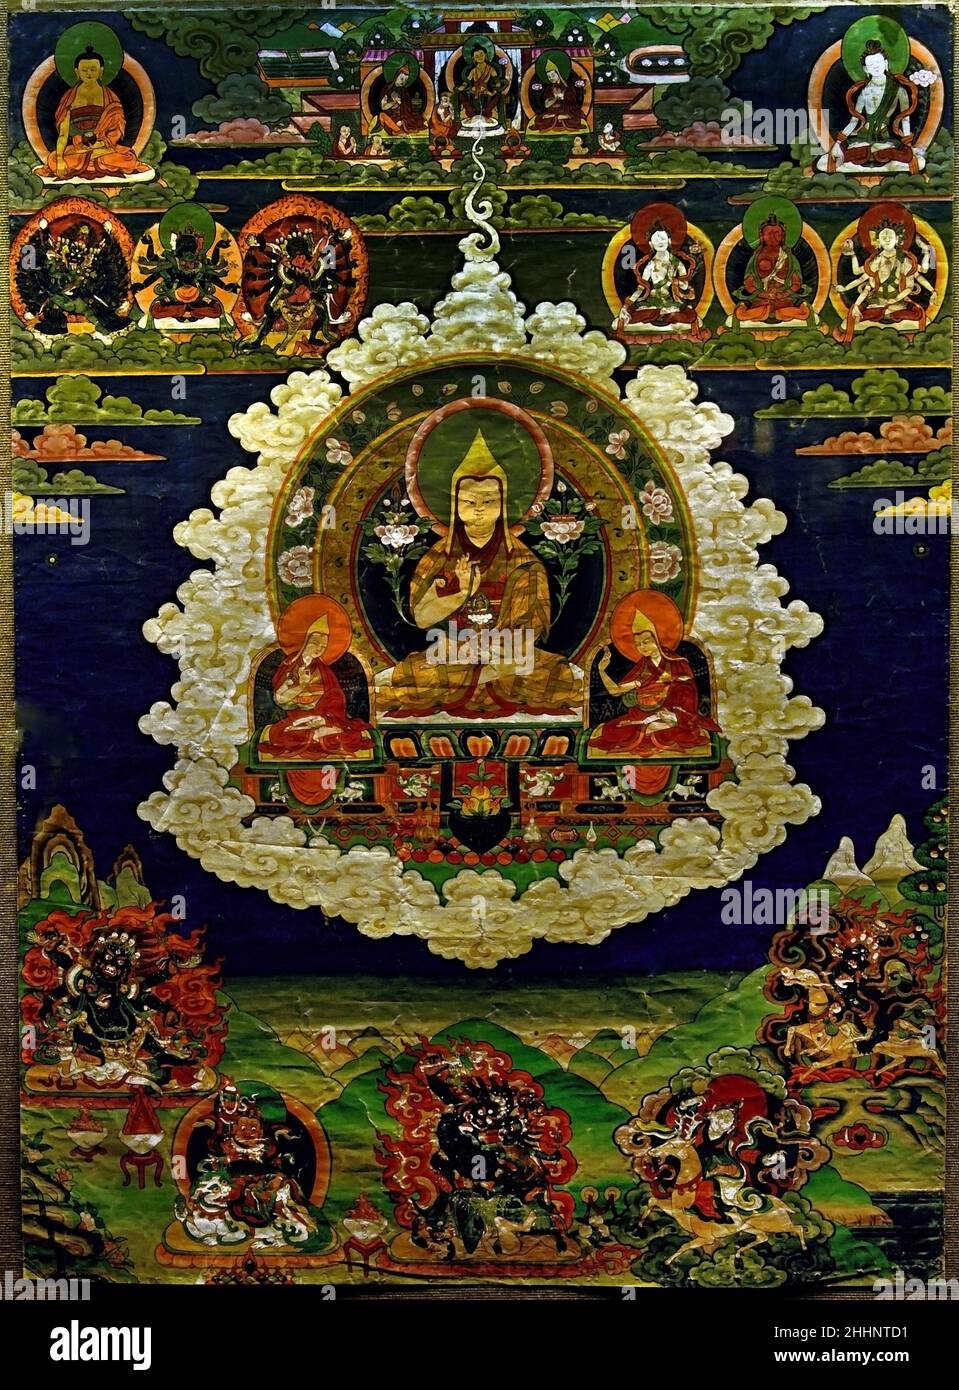 Tsong Kha Pa and the protectors  Tibet tempera on cotton.  ( 15th century saint and scholar of Tibet. Lama Tsongkhapa Typically hung in the grand hall of monasteries, they illustrate how, throughout his previous lives, the Noble Je Tsongkhapa cultivated the Path leading to Enlightenment and how his spiritual progression was attested by prophecies of all the Buddhas of the past. ) Stock Photo